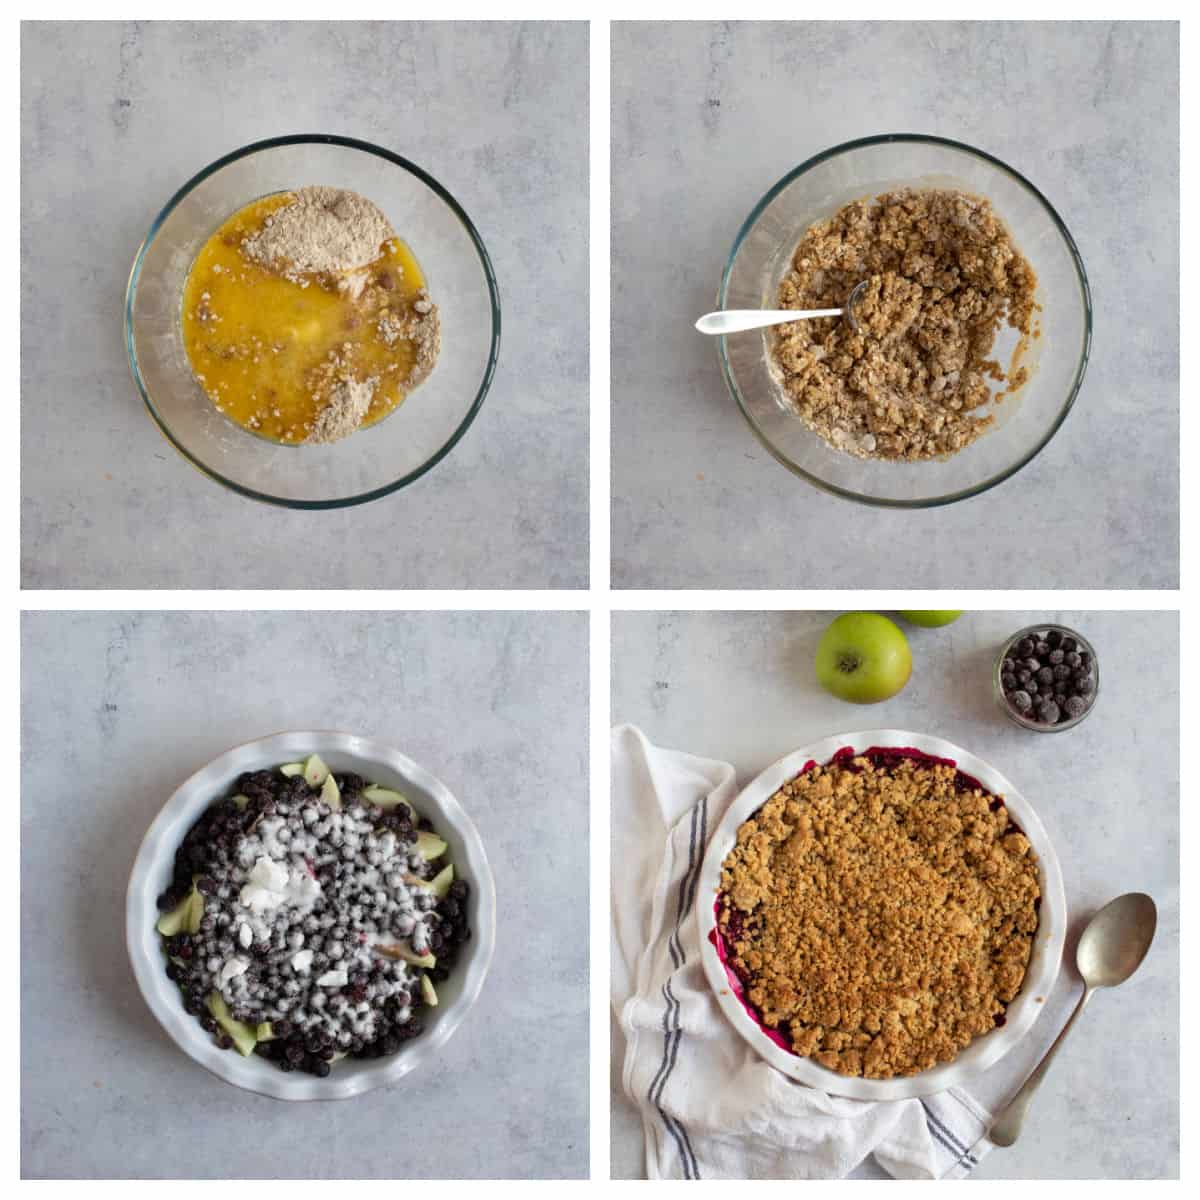 Step by step photo instructions for making blackcurrant apple crumble.